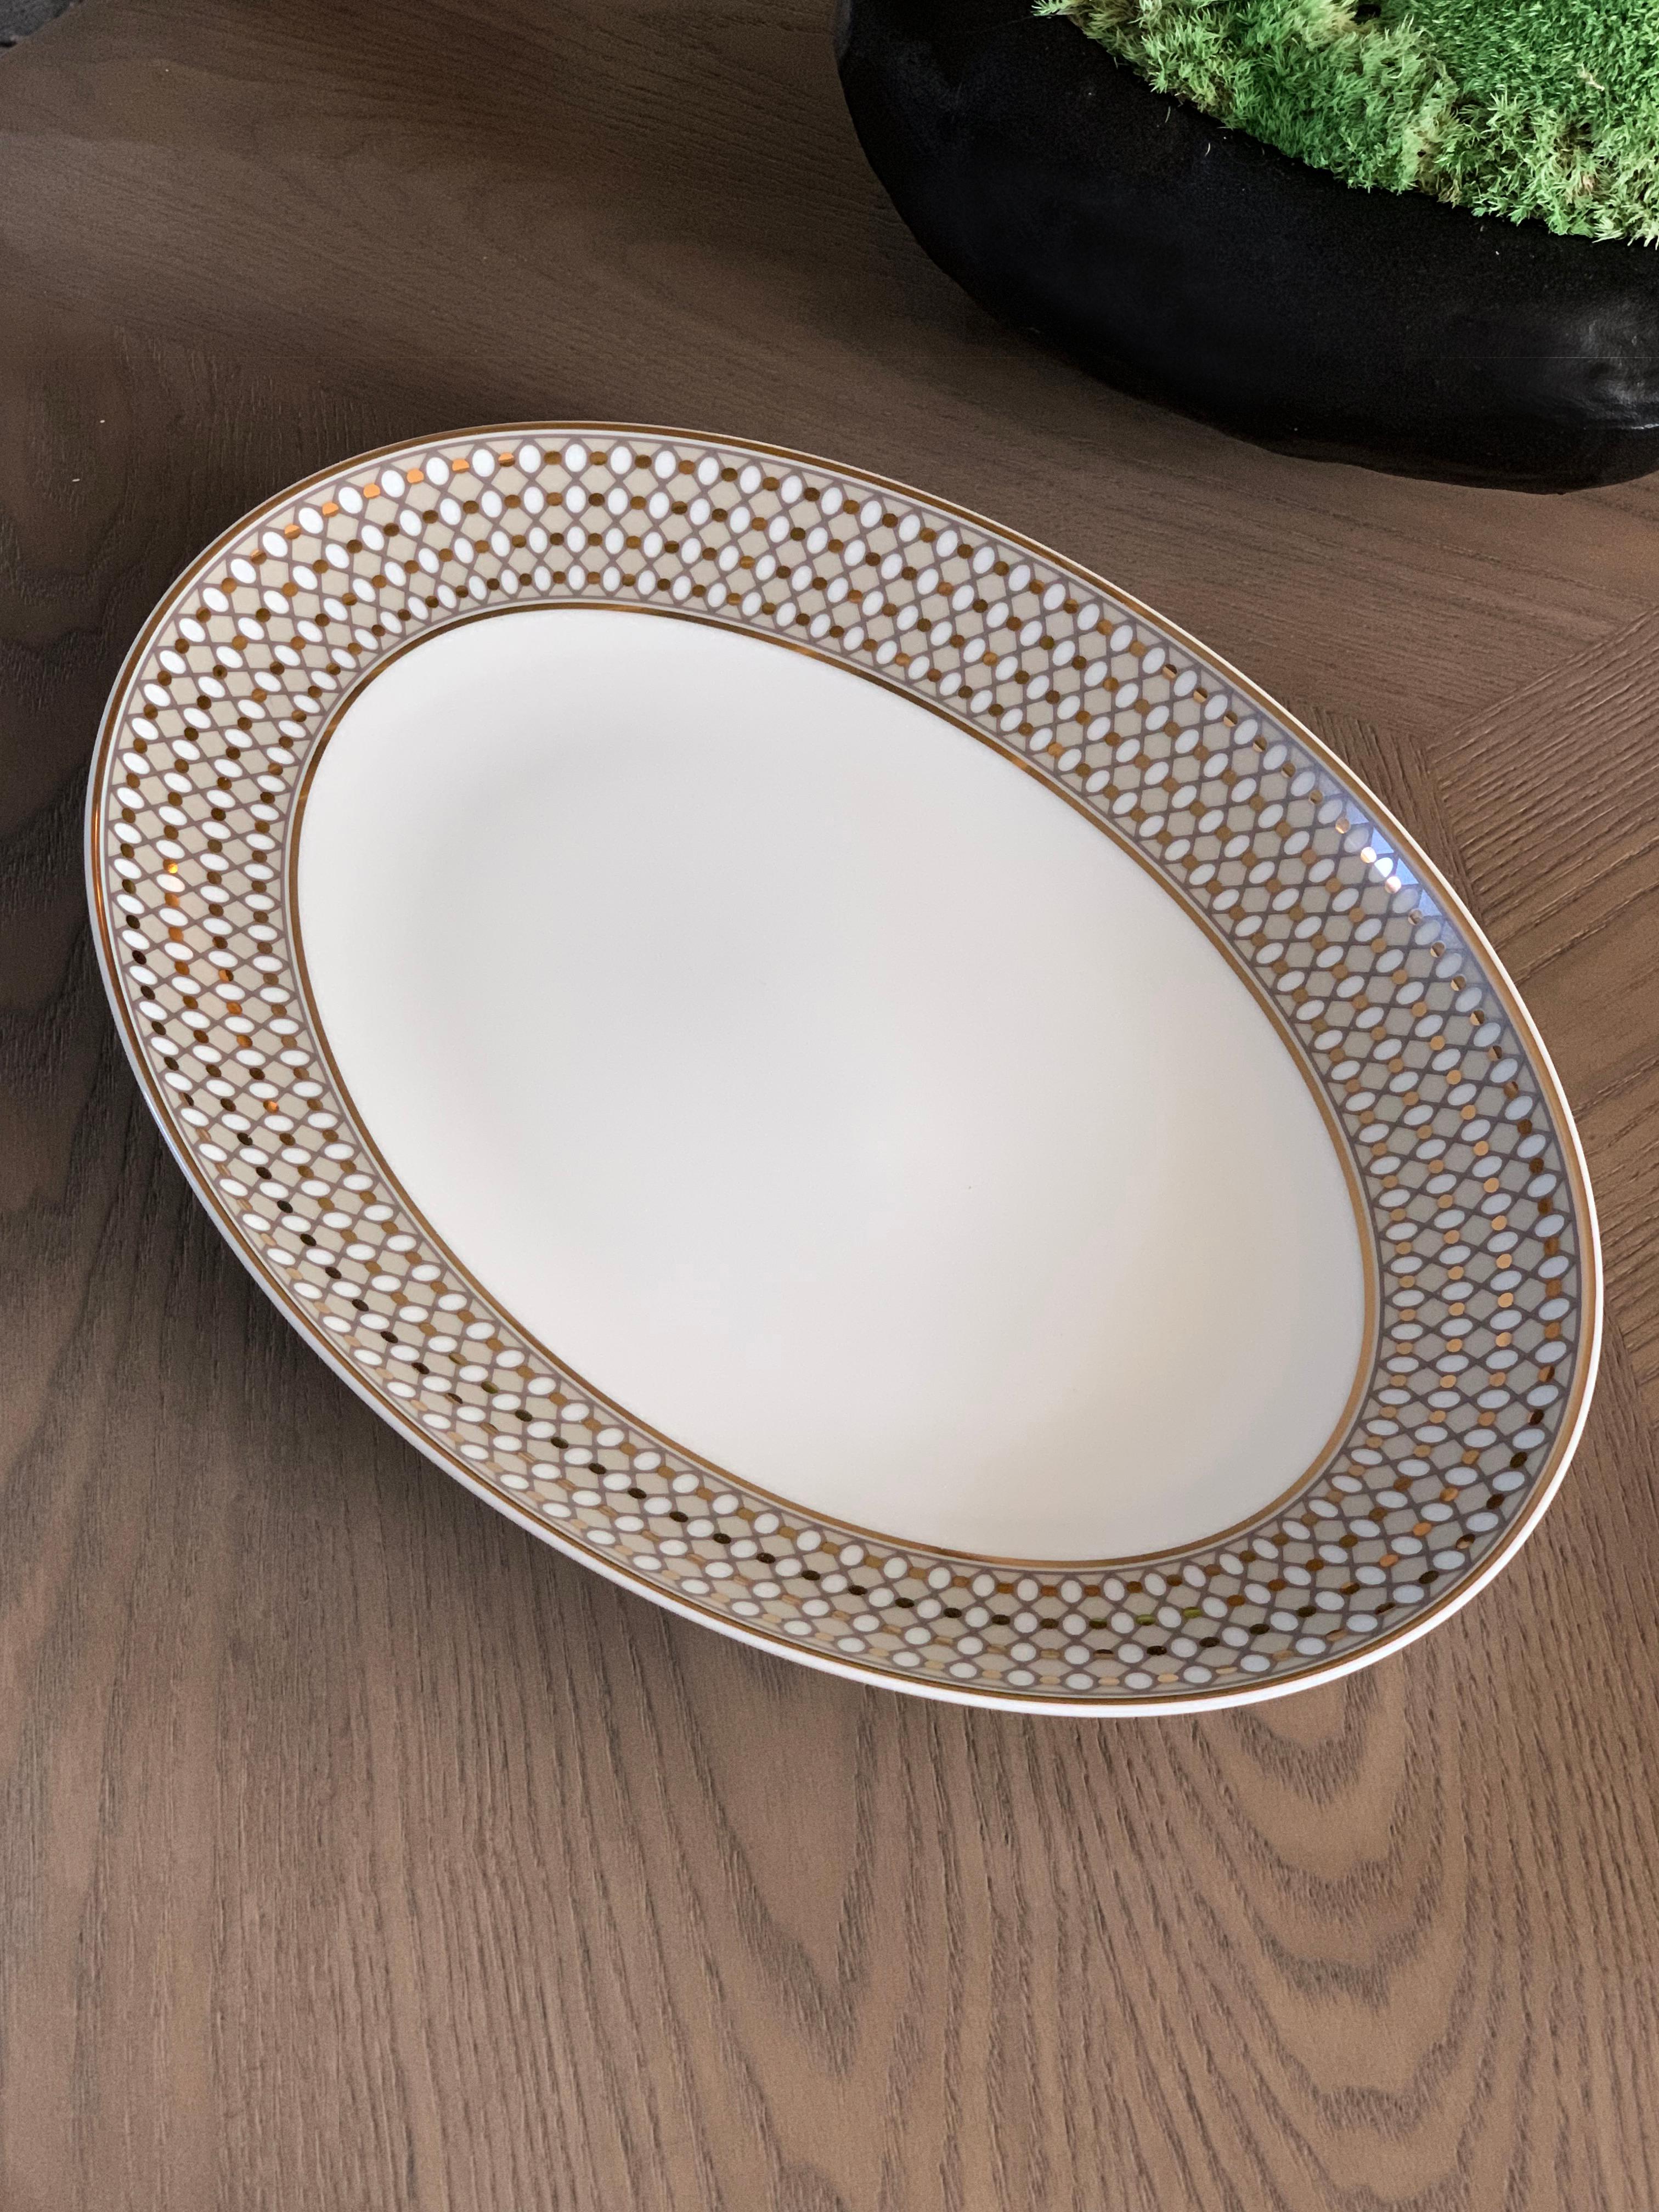 Larger quantities available upon request, with 8 weeks production time.

Description: Large oval serving plate
Color: Beige and gold
Size: 37 x 26 x 4 H cm
Material: Porcelain and gold
Collection: Modern vintage.